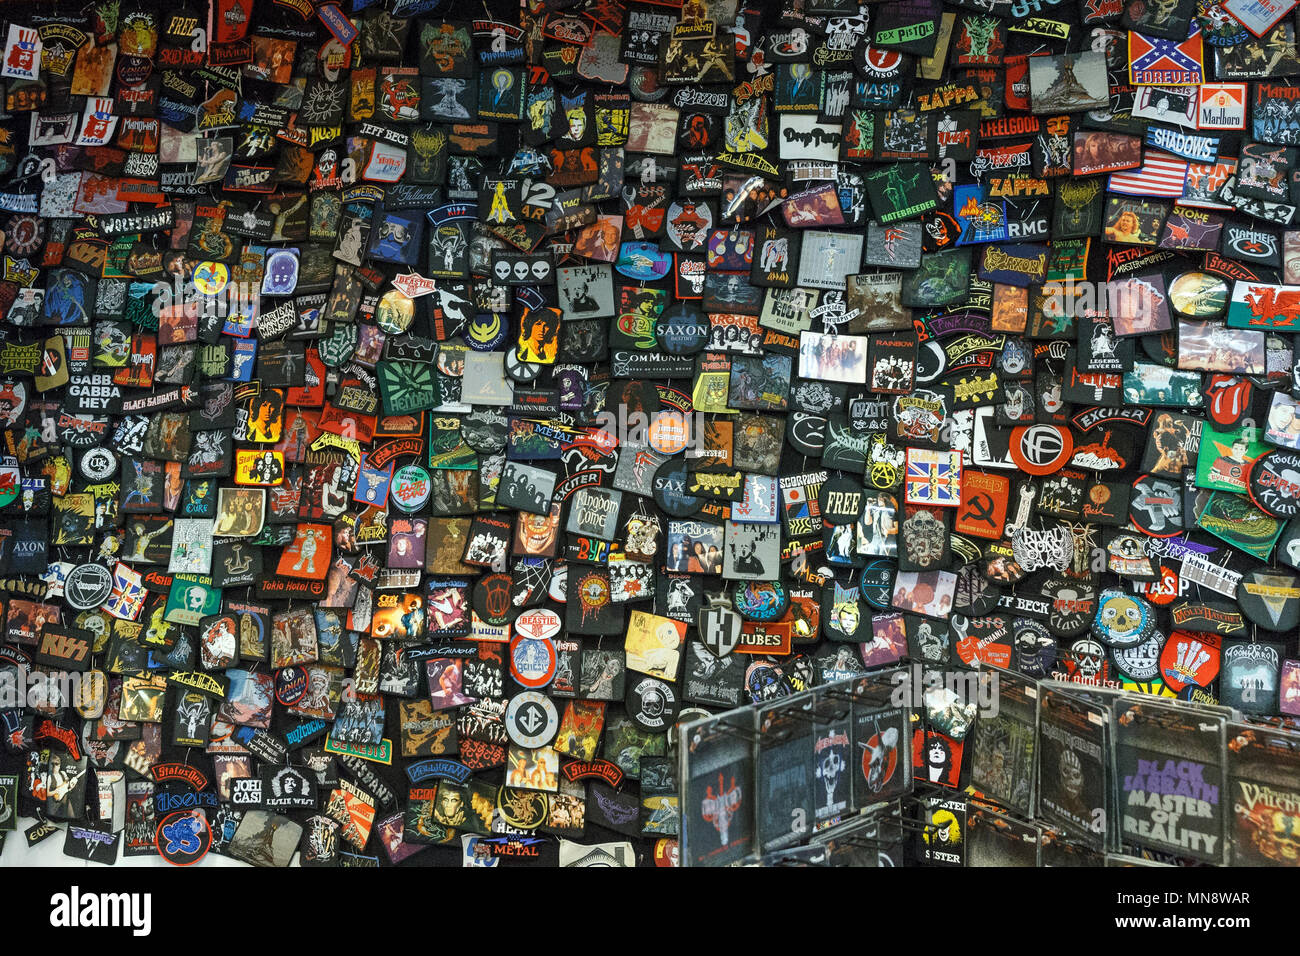 A wall of band patches and music badges on display at a rock music festival. Stock Photo